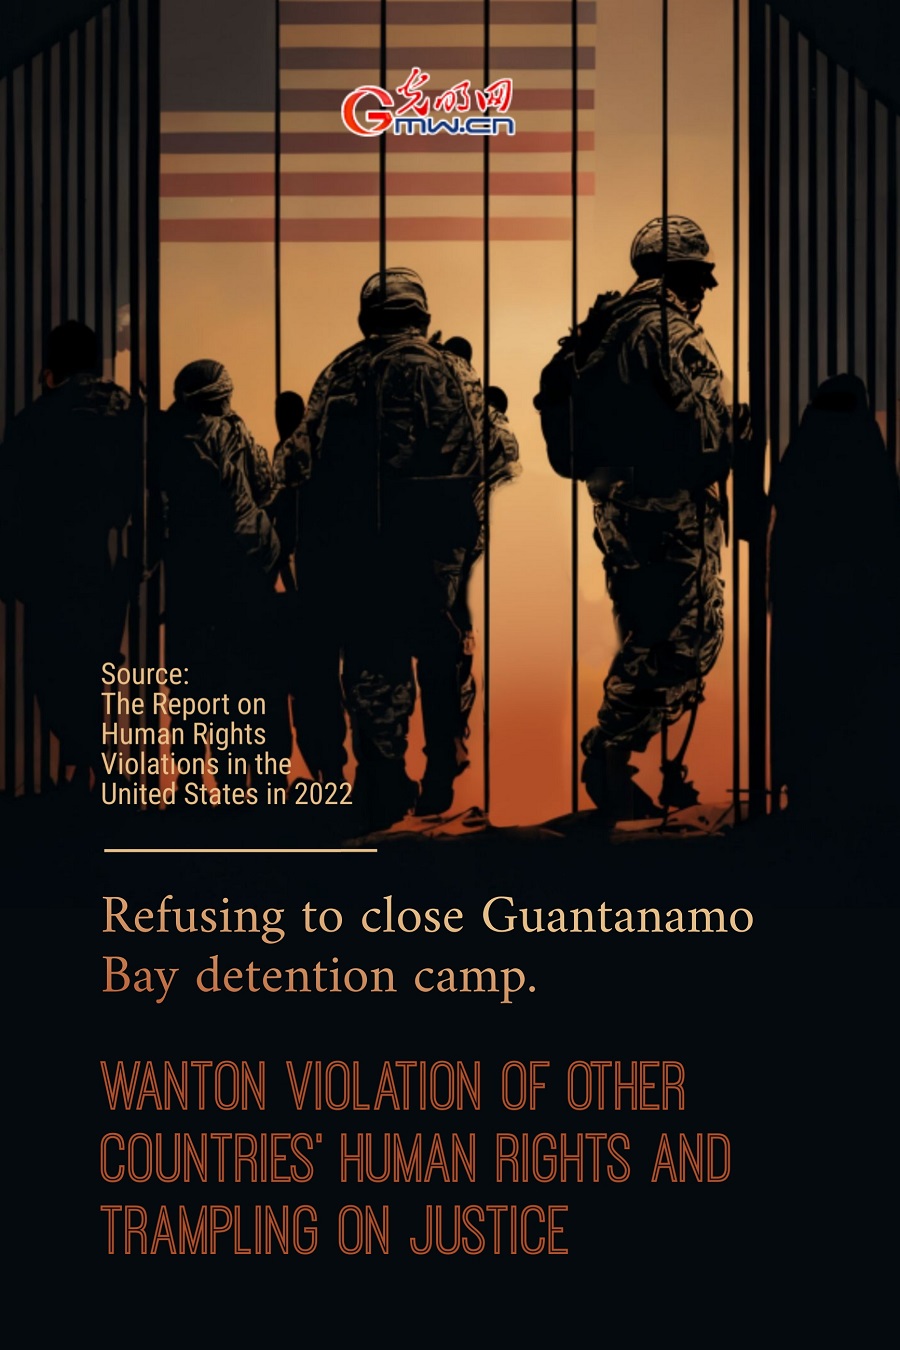 The Report on Human Rights Violations in the United States in 2022: Wanton Violation of Other Countries' Human Rights and Trampling on Justice